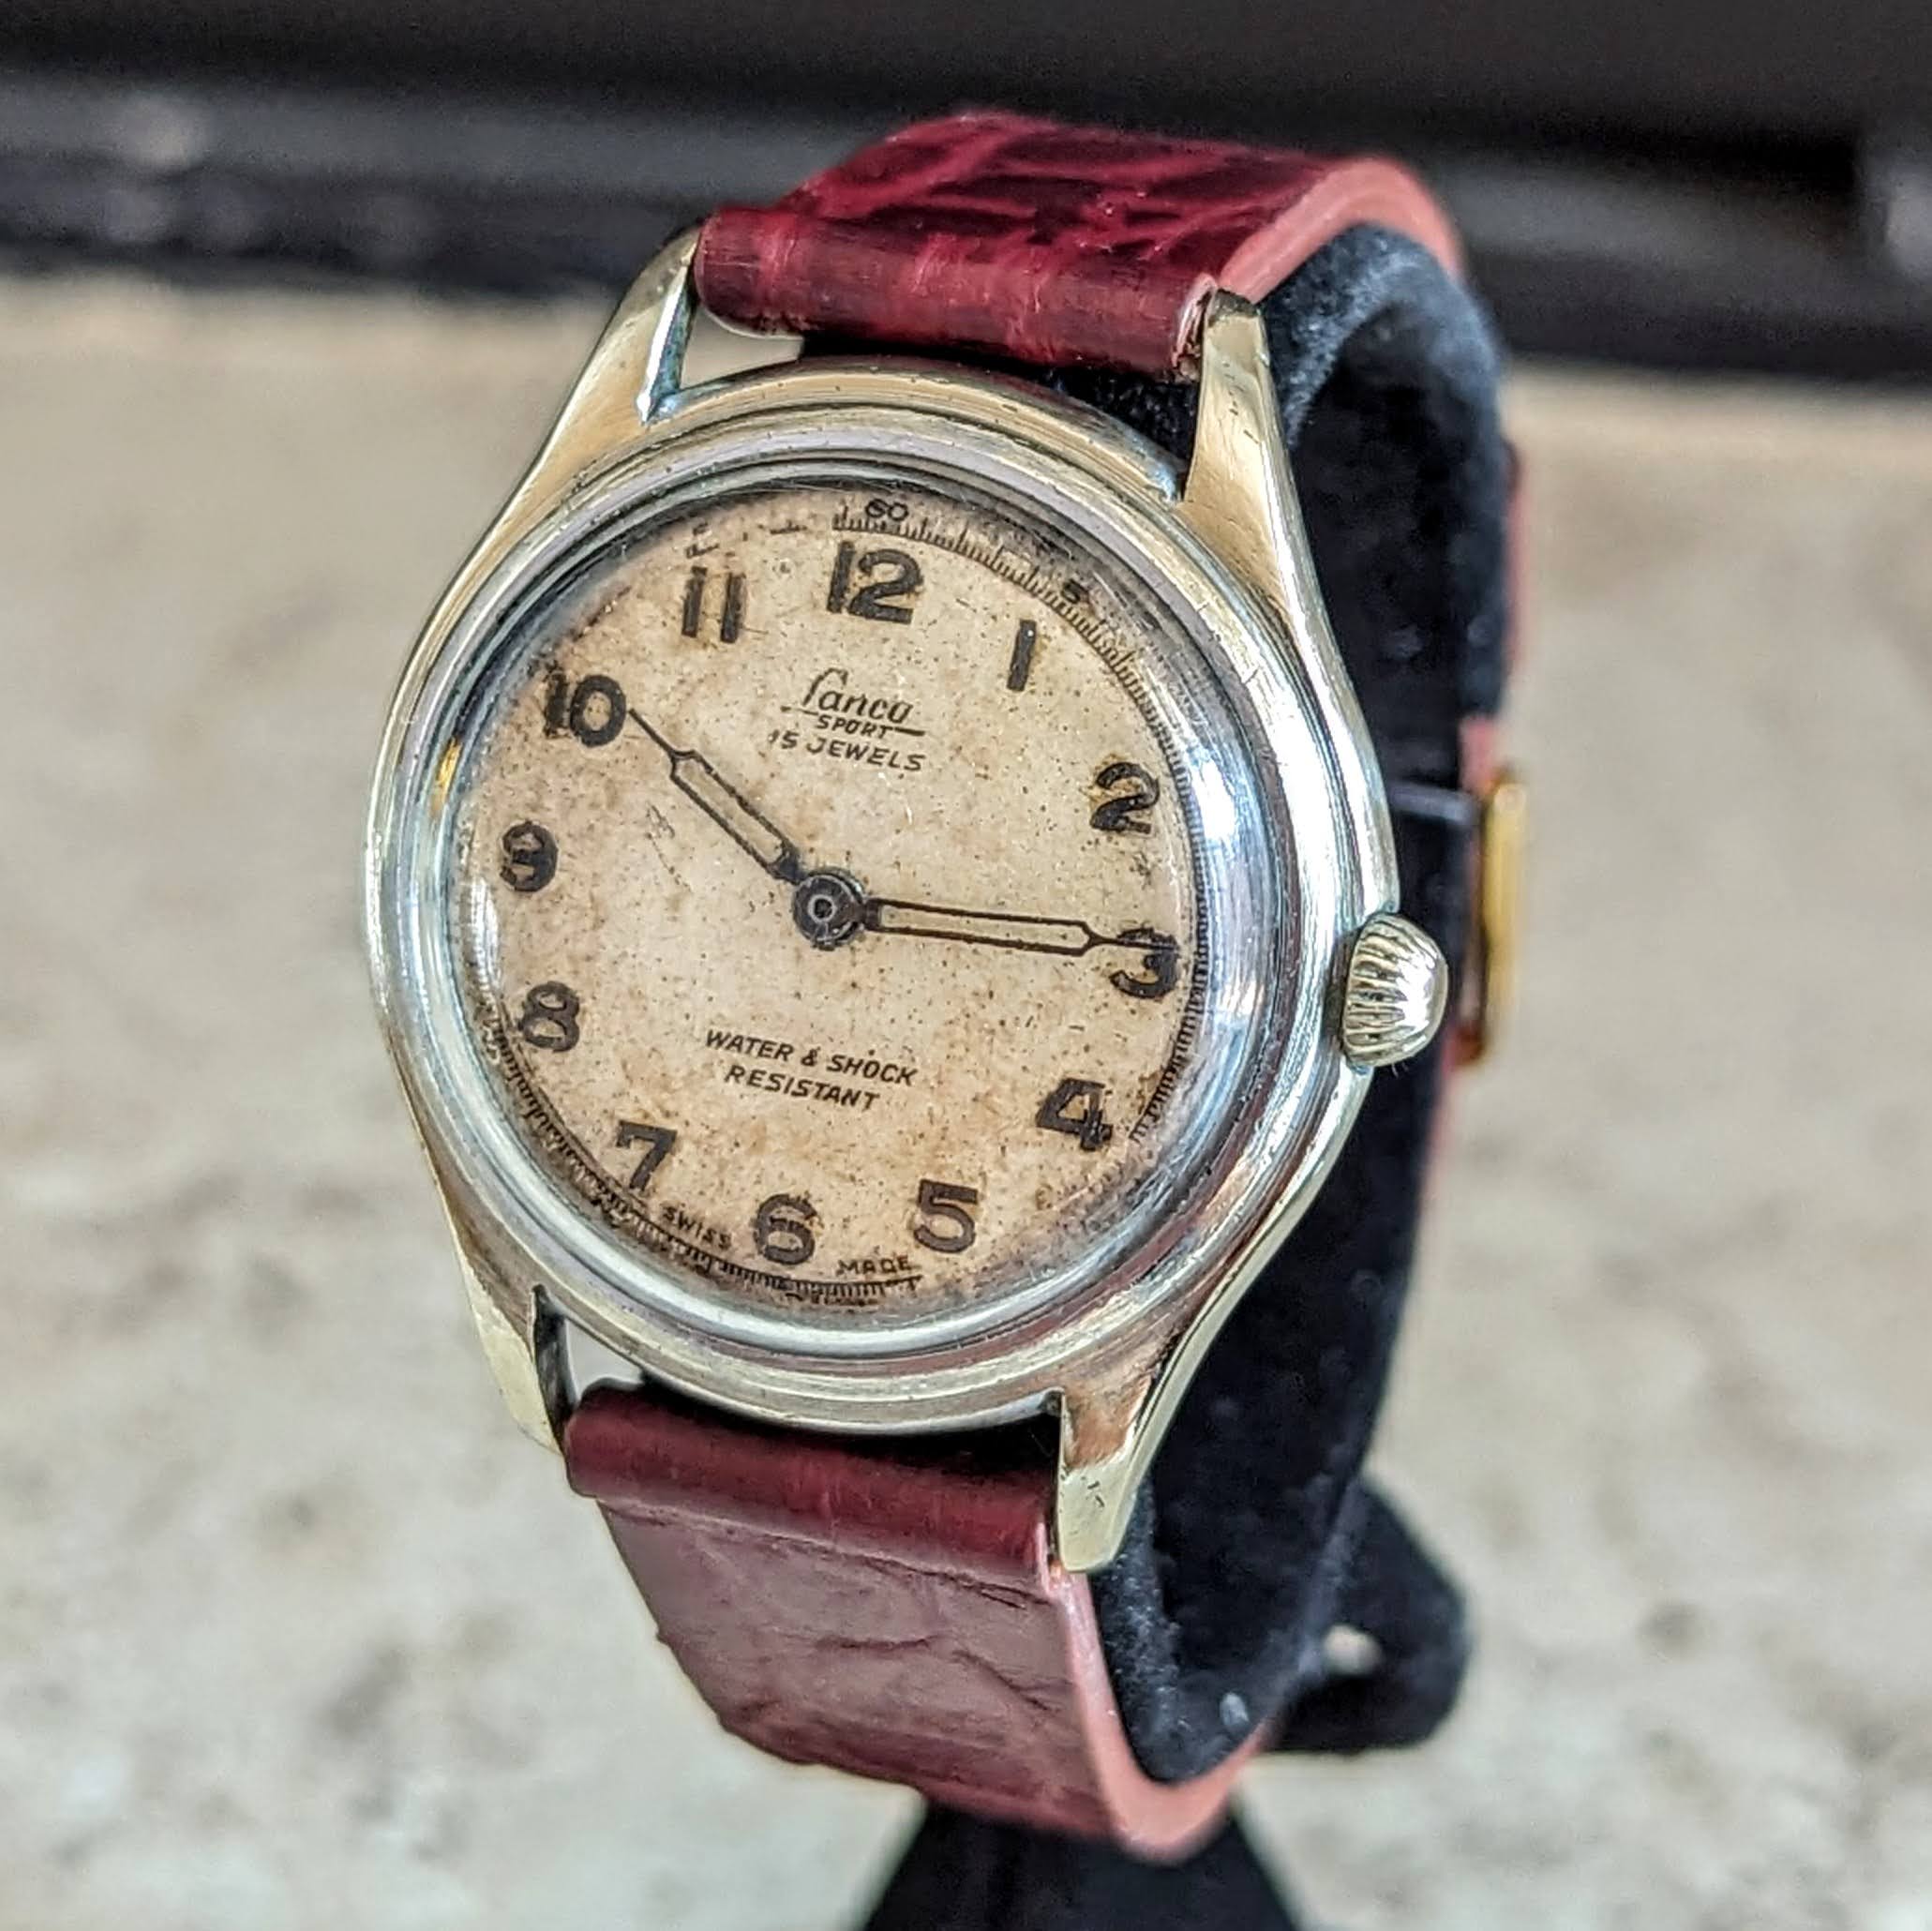 1950's LANCO Sport Watch 15 Rubis Cal. 1064 Water & Shock Resistant Military Style Wristwatch